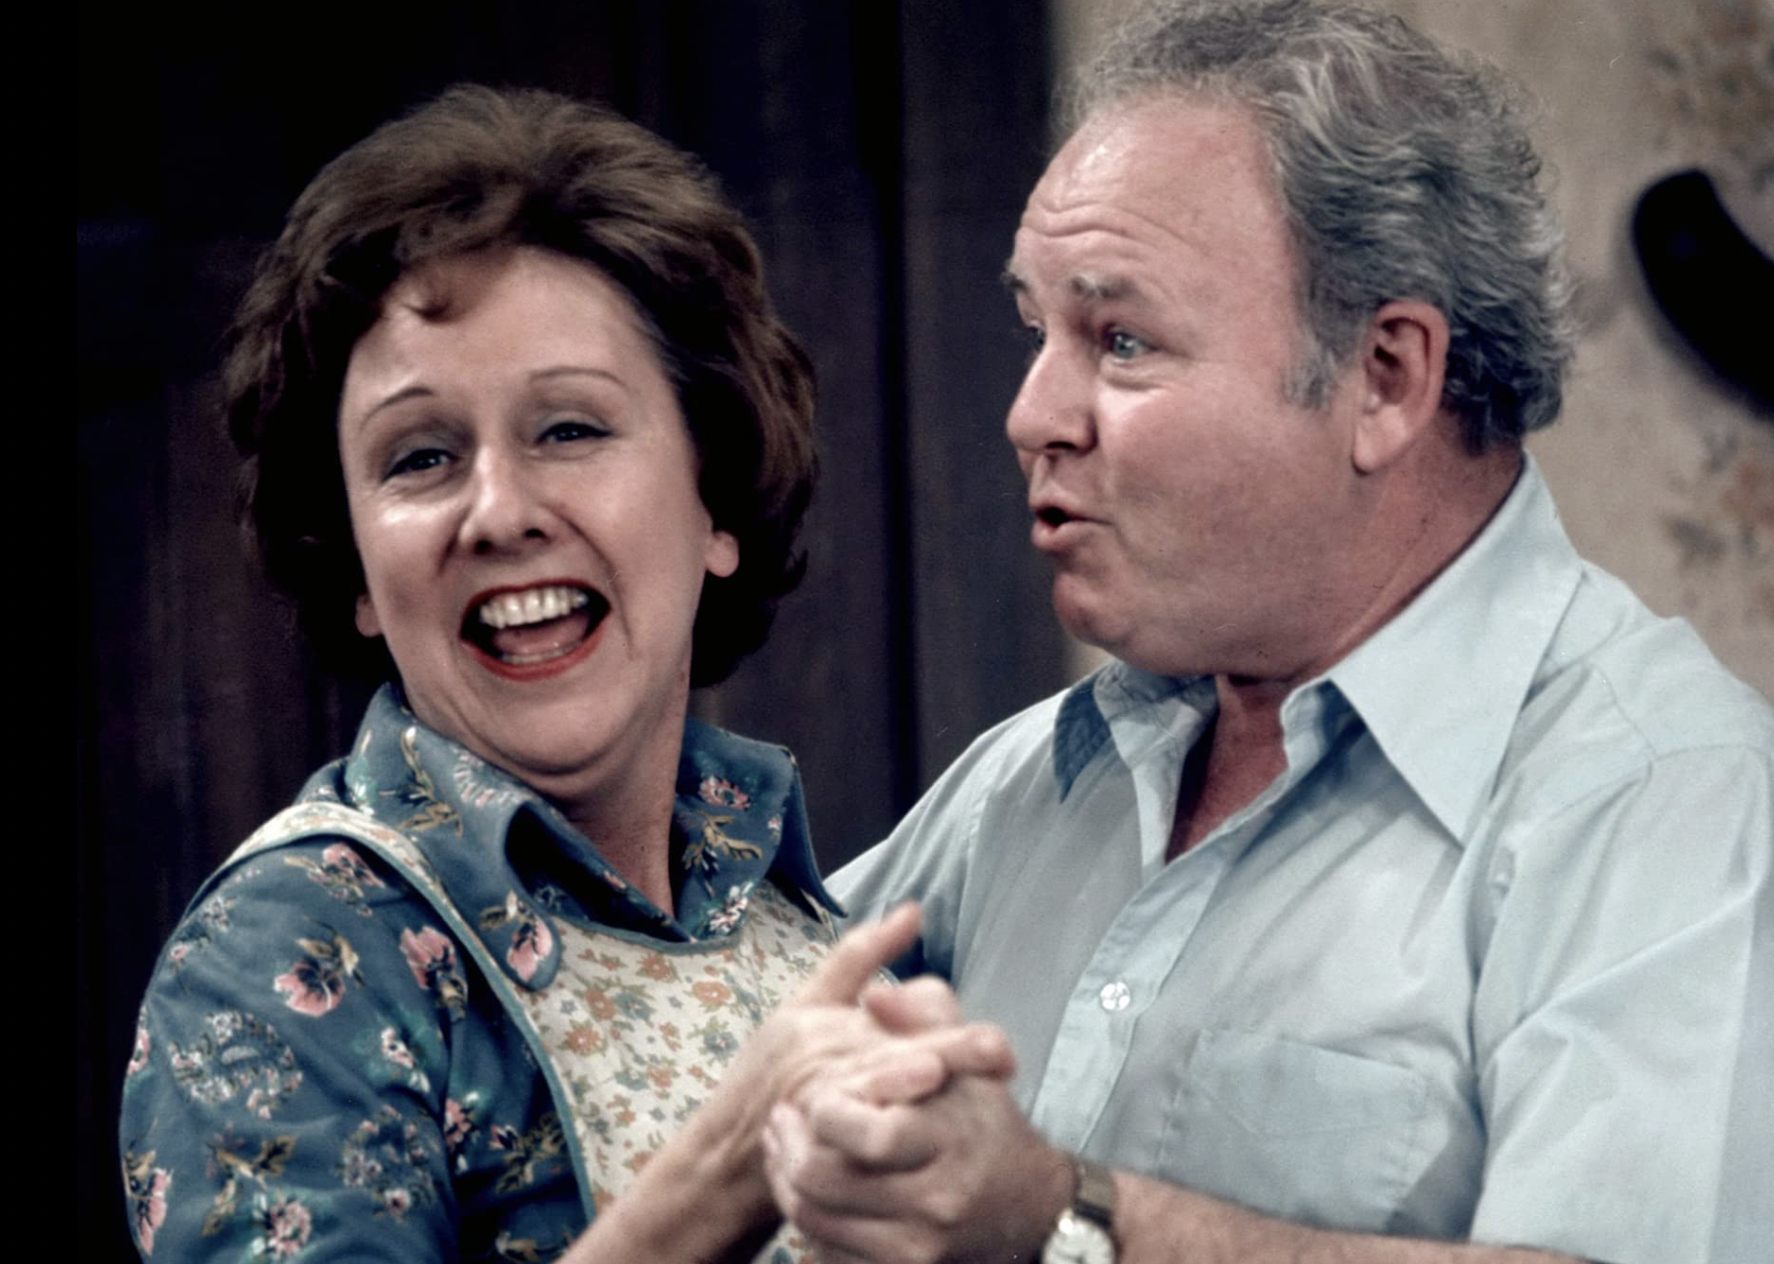 Carroll O'Connor and Jean Stapleton in "All in the Family".